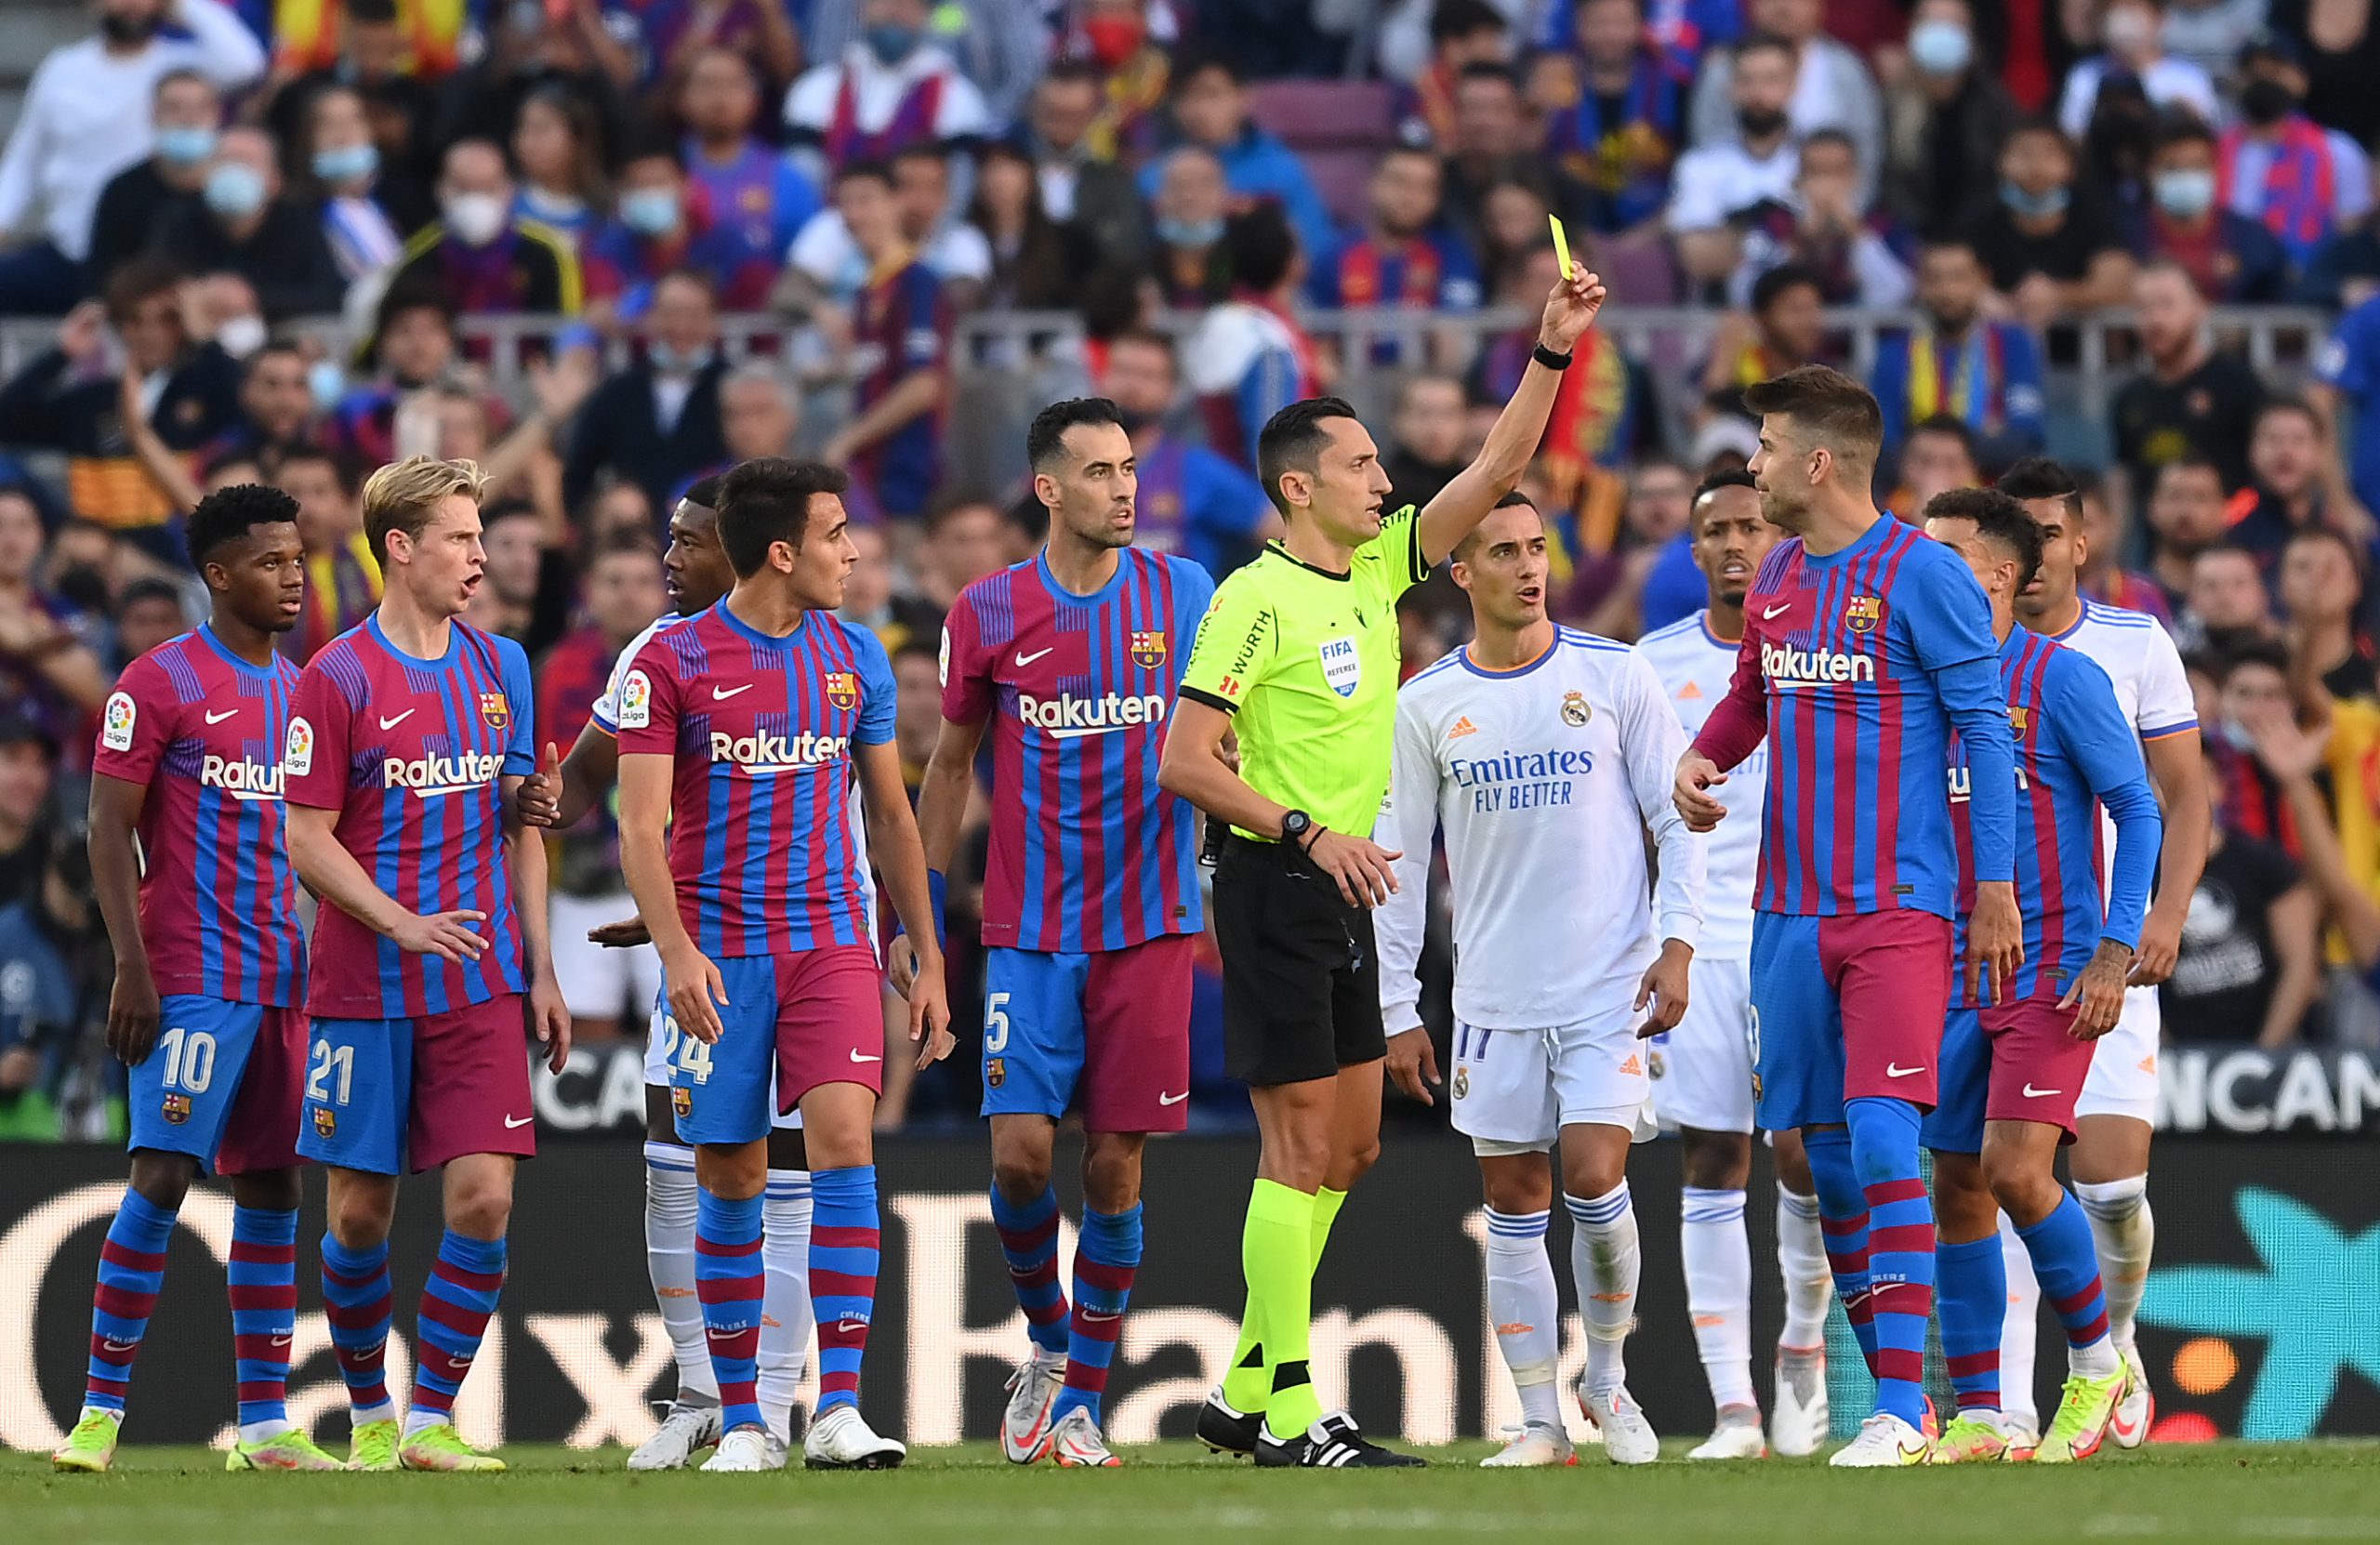 Real Madrid vs Barcelona LIVE: When and where to watch EL CLASICO Live Streaming in your country? Get Live Telecast details